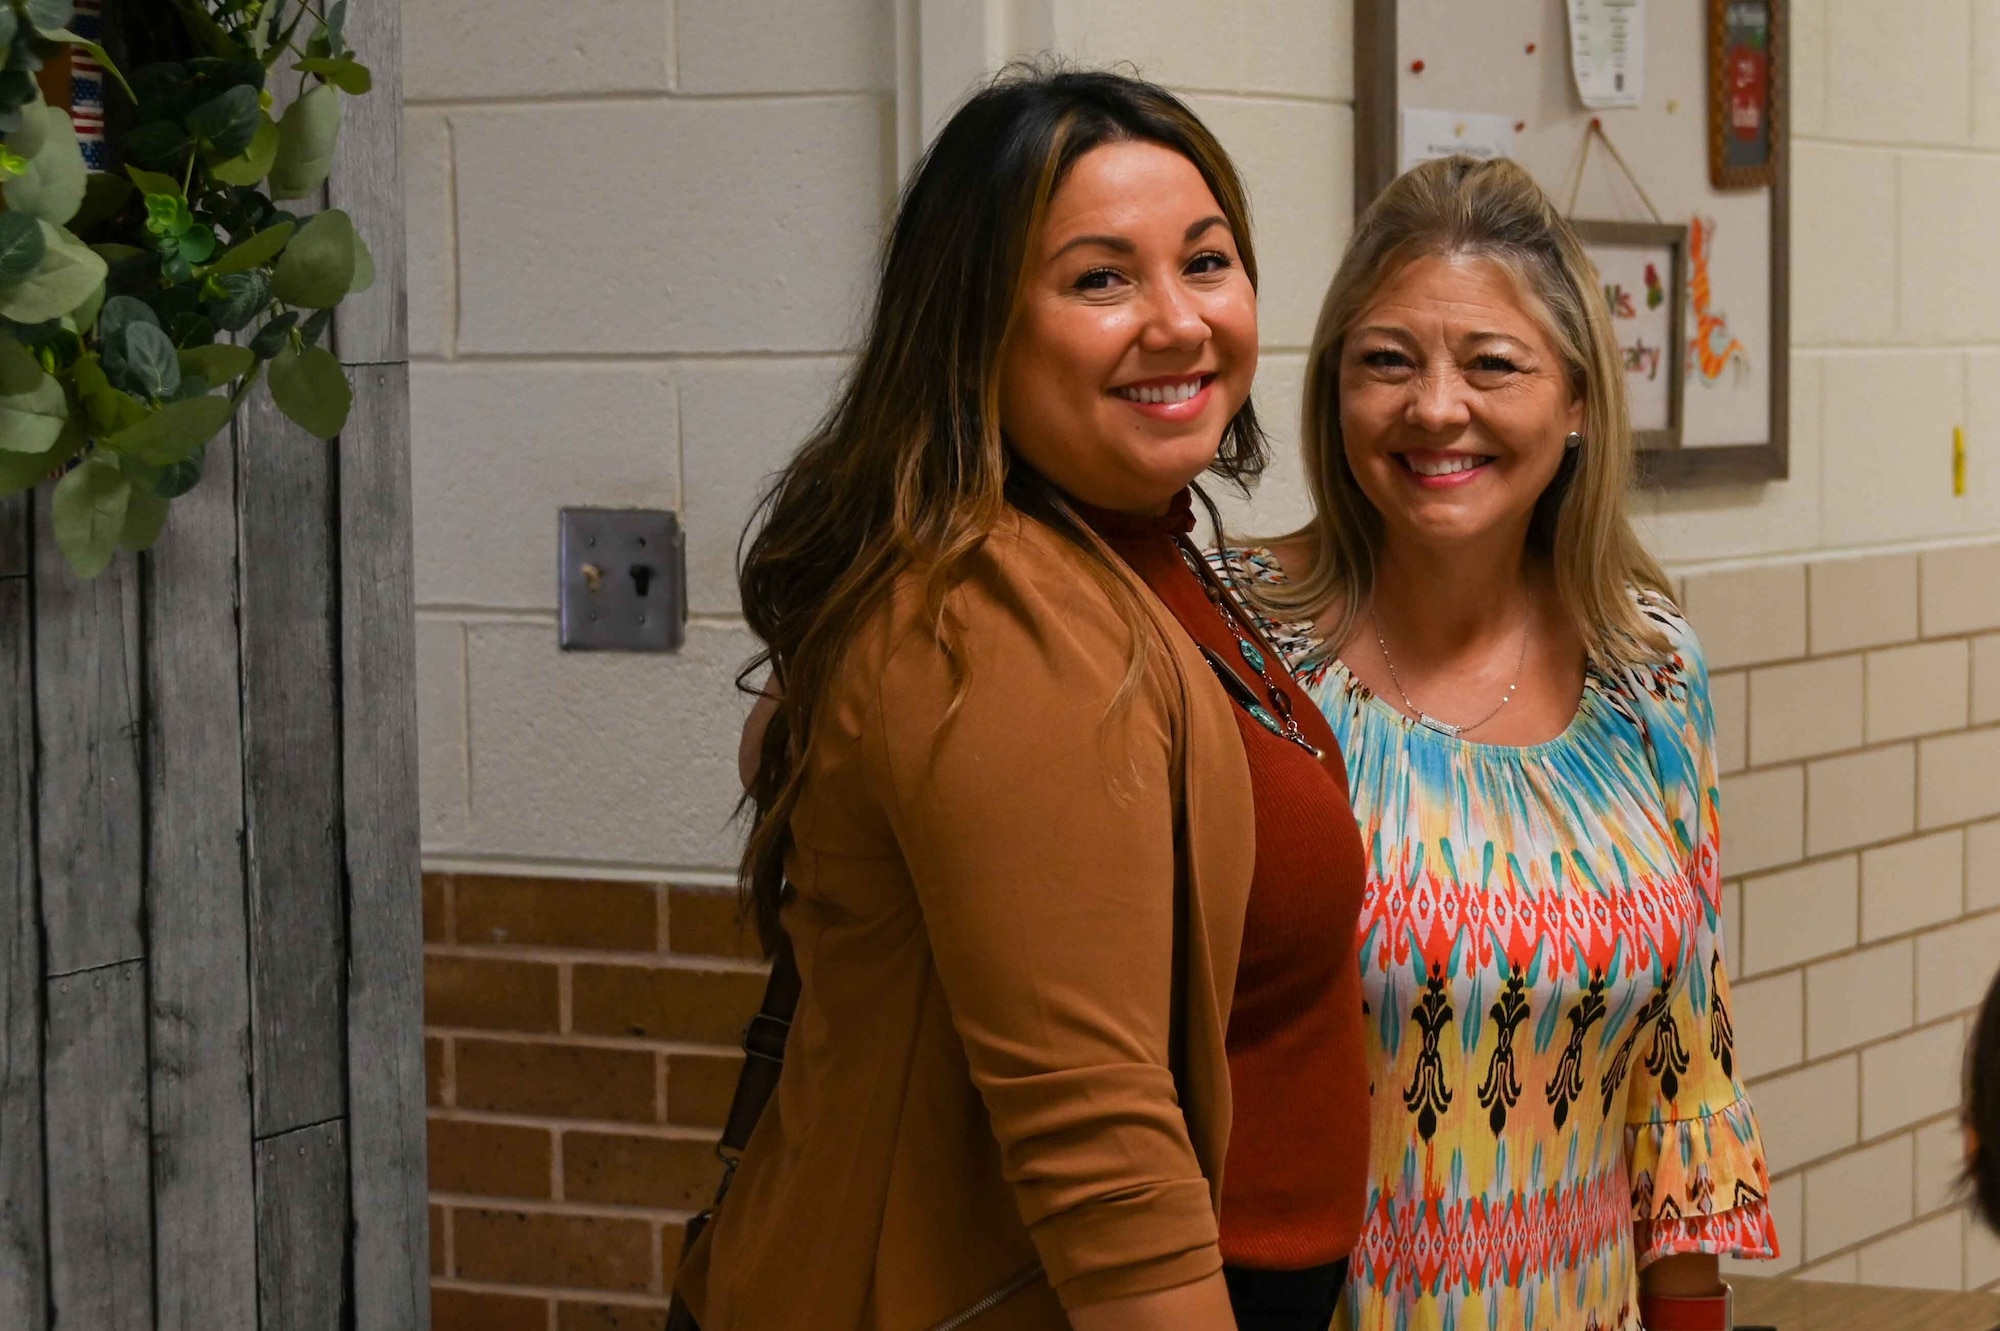 Gwendolyn Brakebill (left), 97th Force Support Squadron school liaison program manager, smiles with Sheila Huckaby, a second-grade teacher at L. Mendel Rivers Elementary School, Altus, Oklahoma, Aug. 7, 2023. Brakebill is also the science, technology, engineering, and math representative for the 97th Air Mobility Wing. (U.S. Air Force photo by Airman 1st Class Kari Degraffenreed)